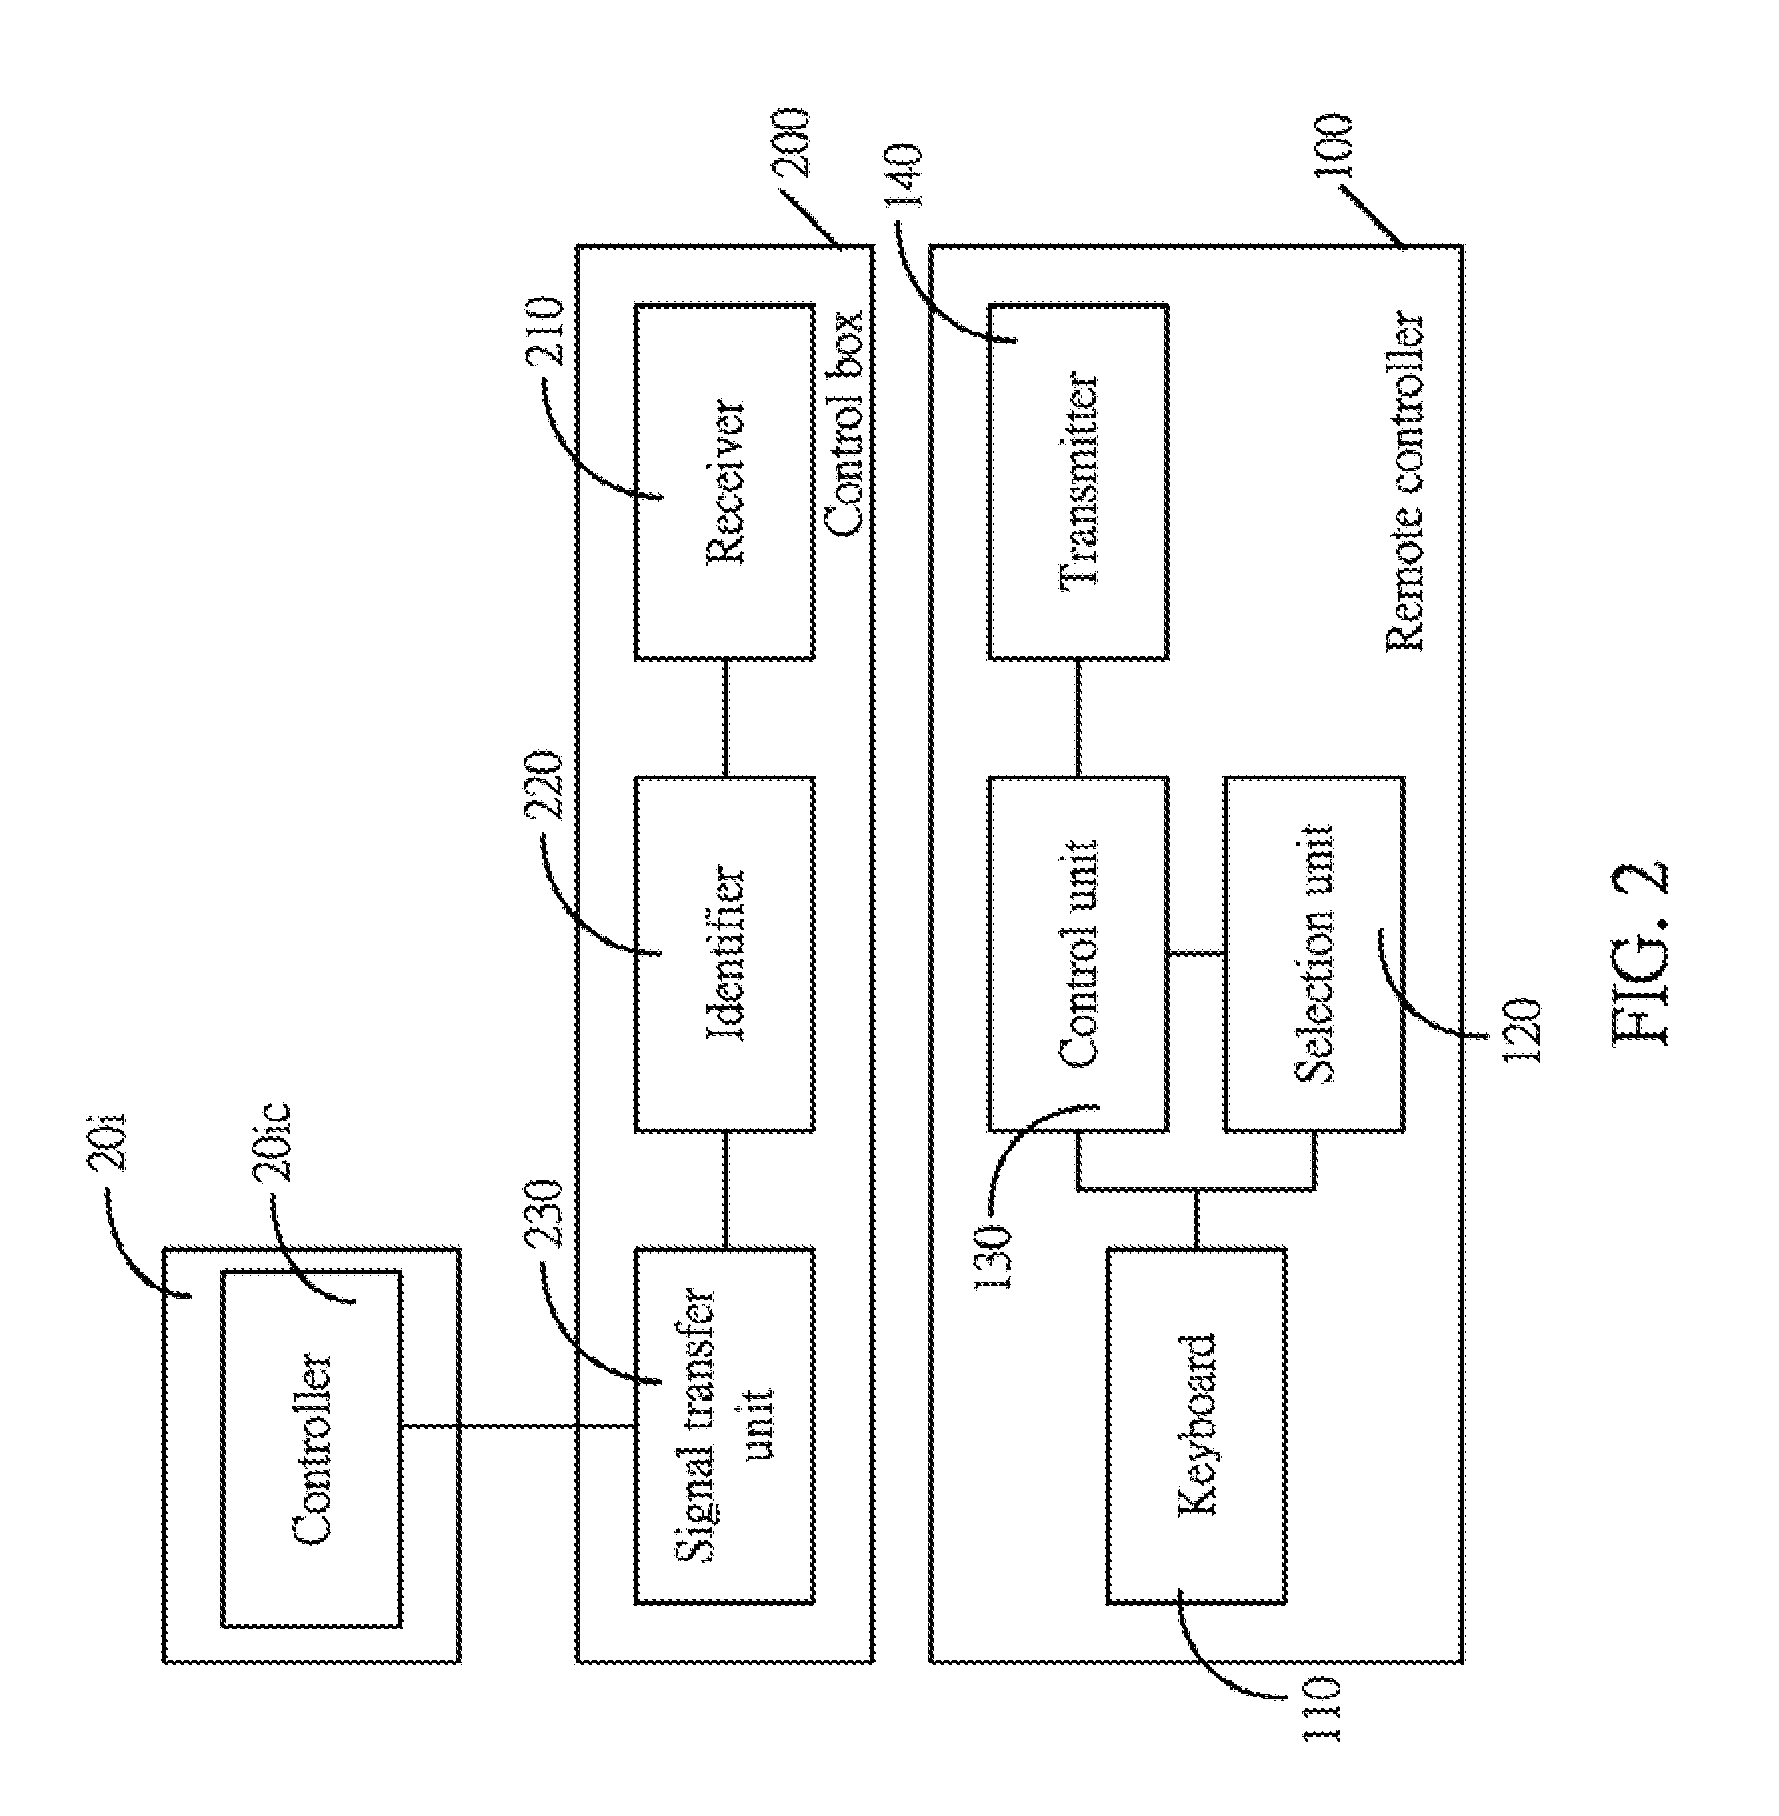 Remote control system for multi-screen display